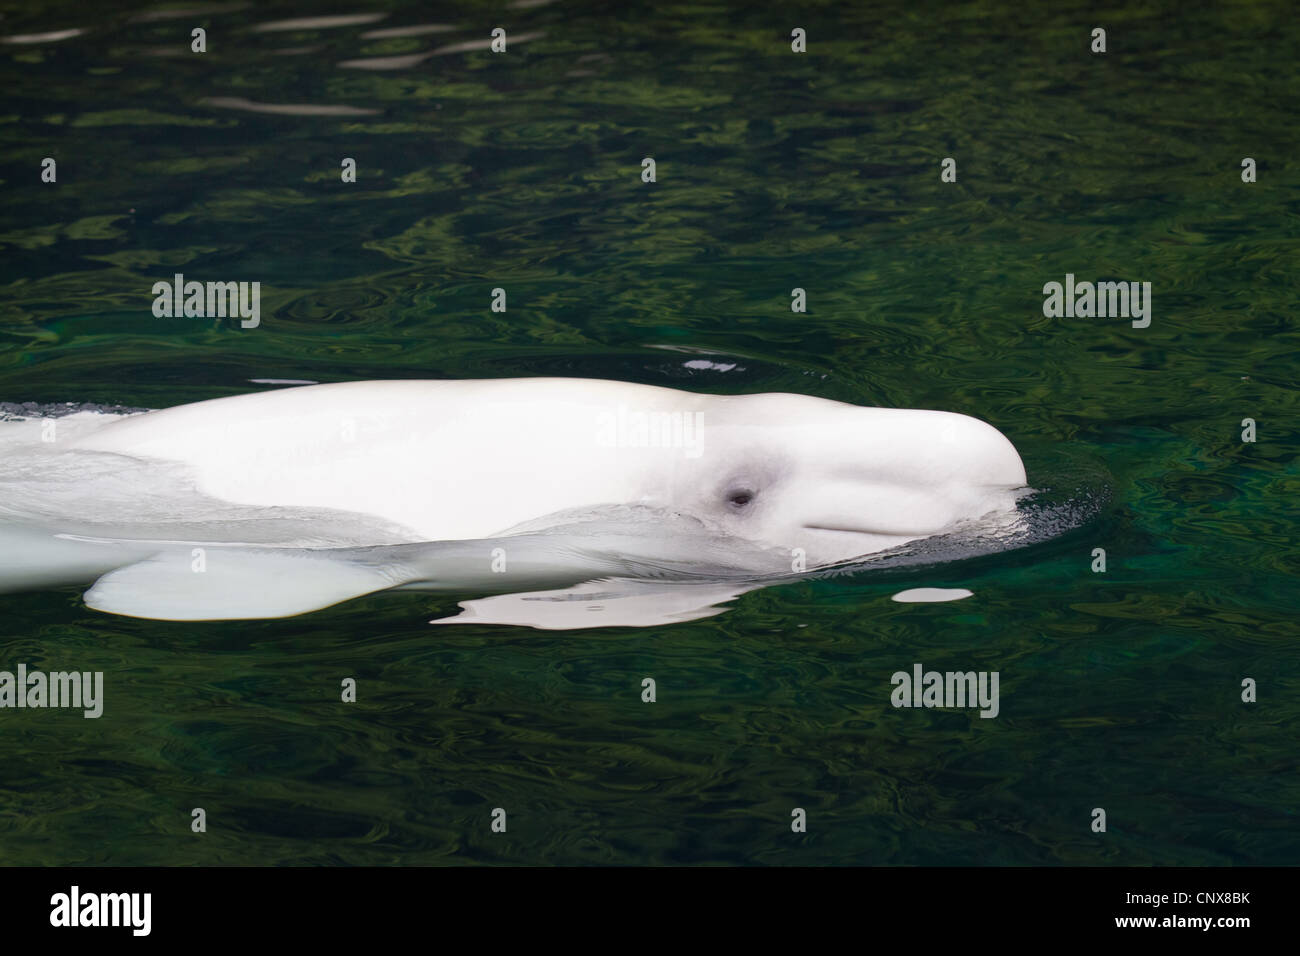 white whale, beluga (Delphinapterus leucas), swimming at the water surface, Canada Stock Photo